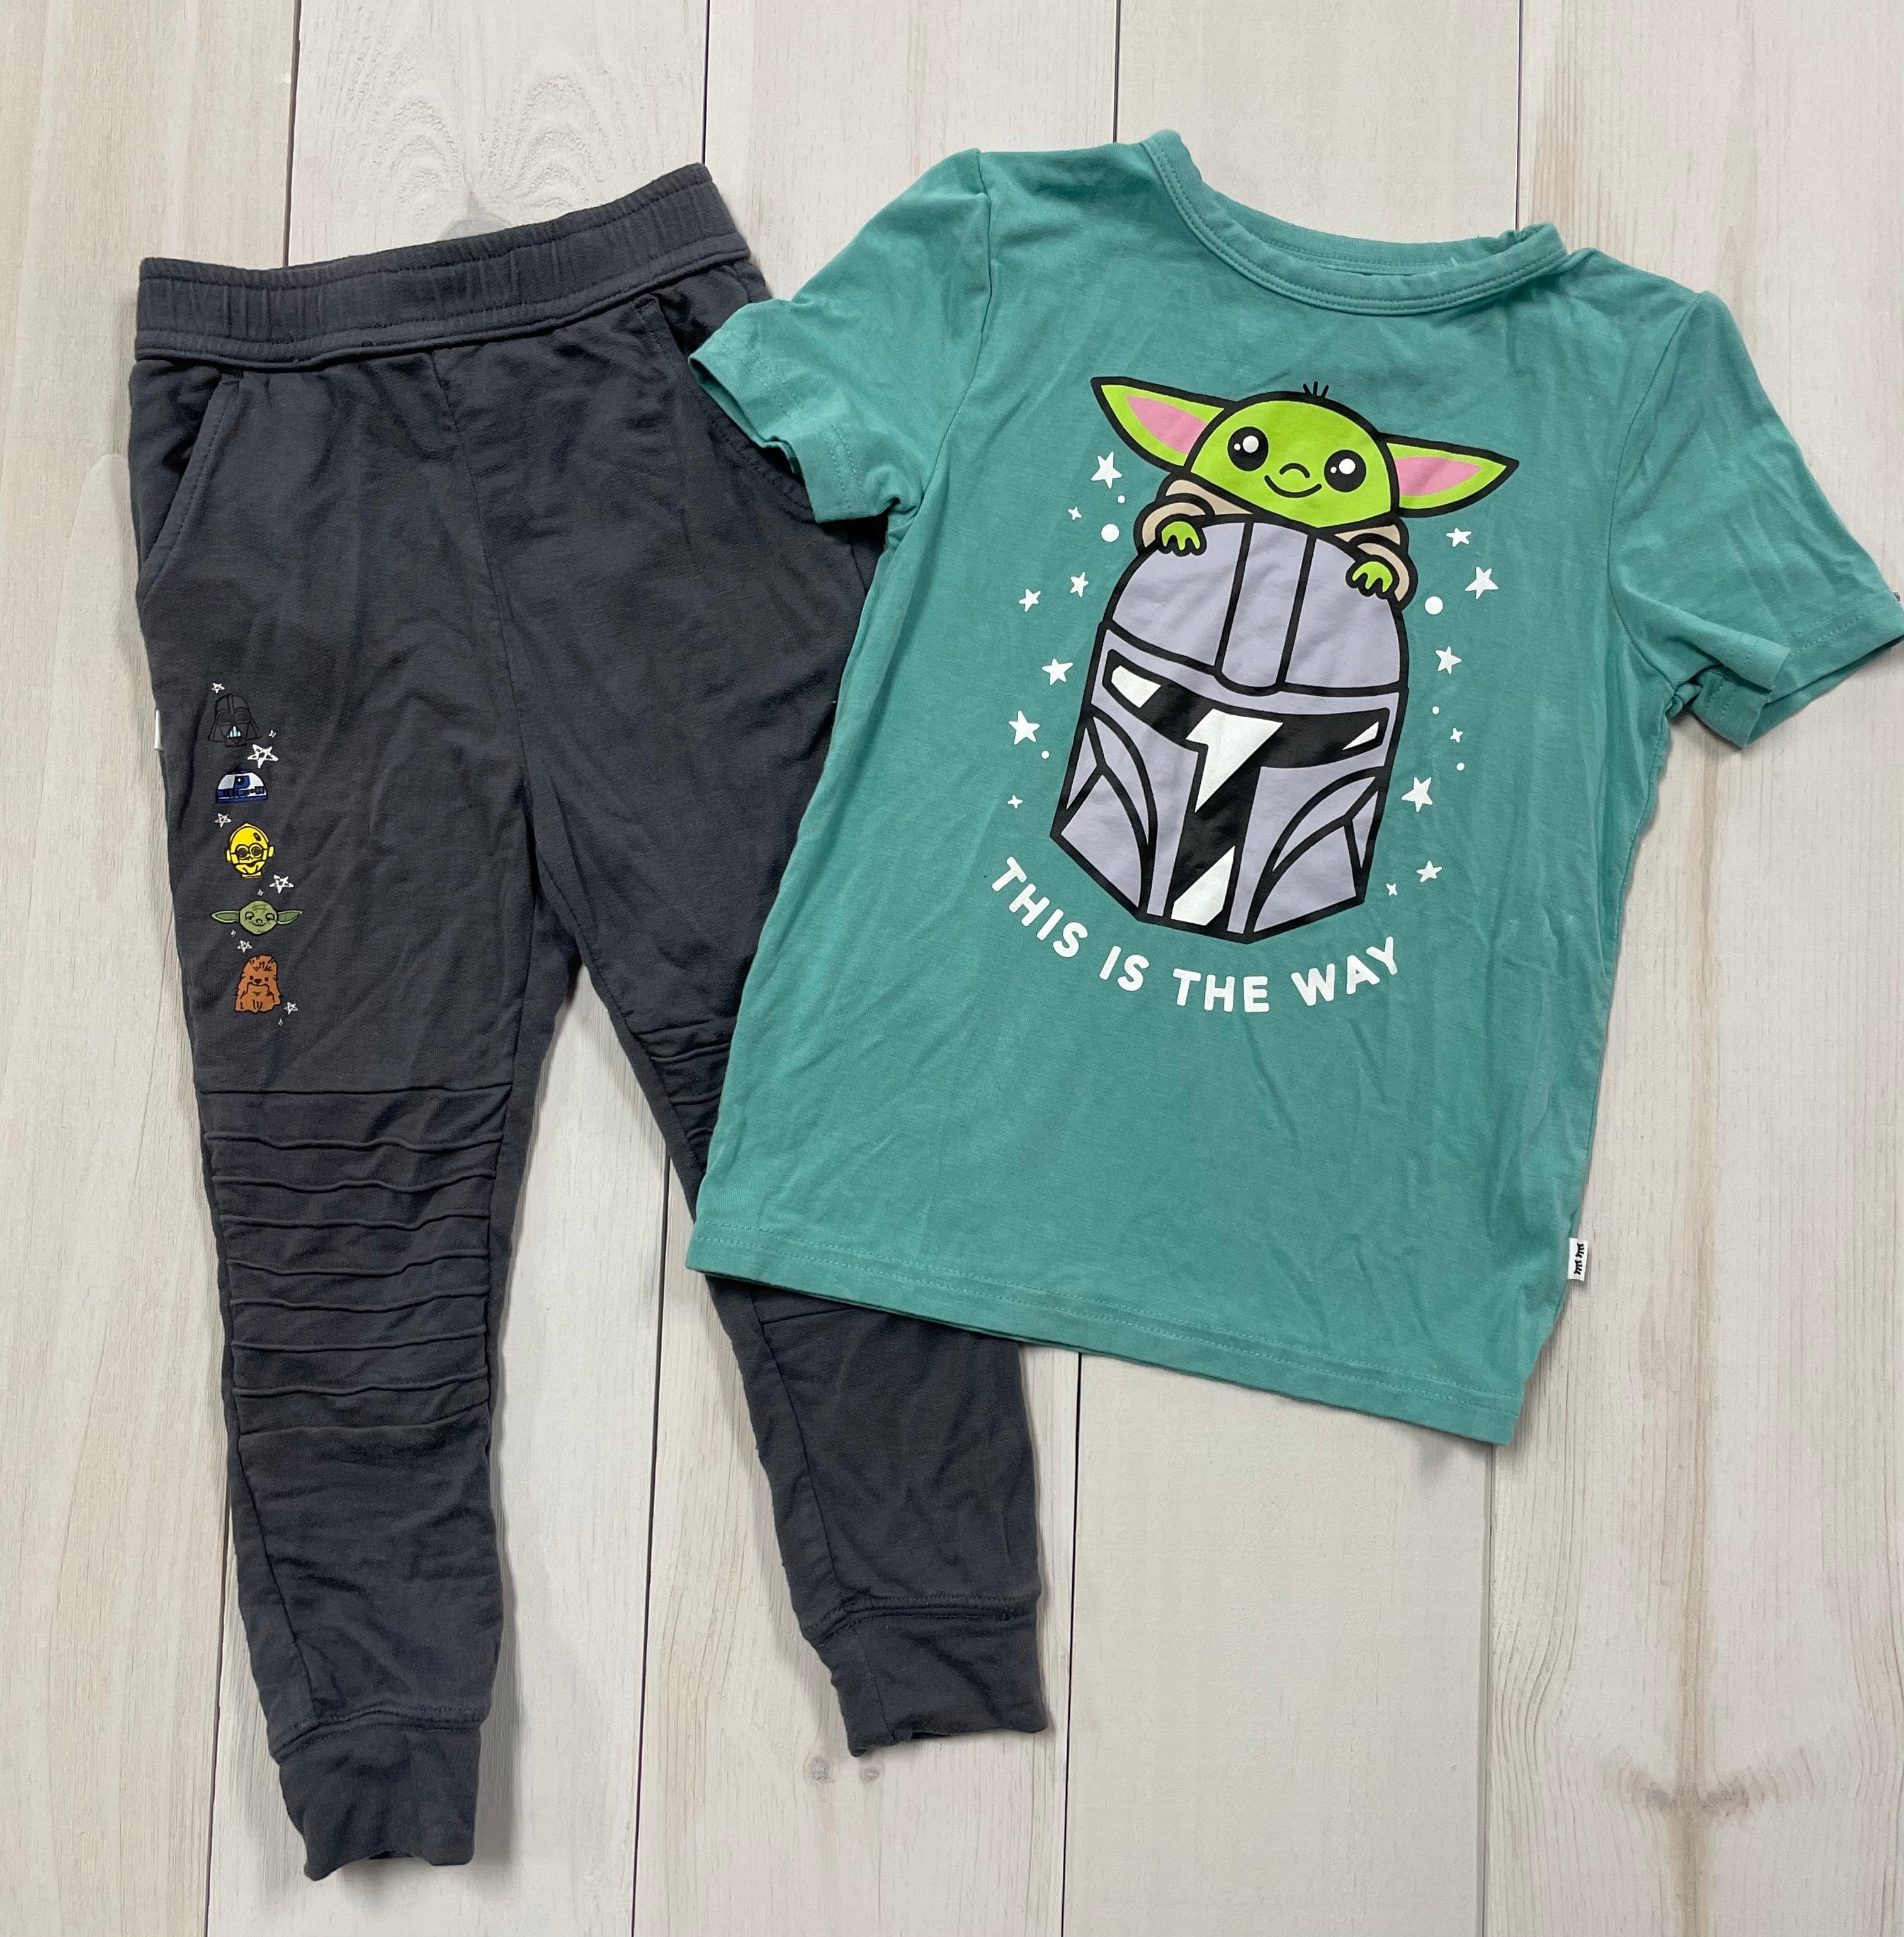 Minnows Childhood Goods Little Sleepies, Star Wars Outfit, 3T